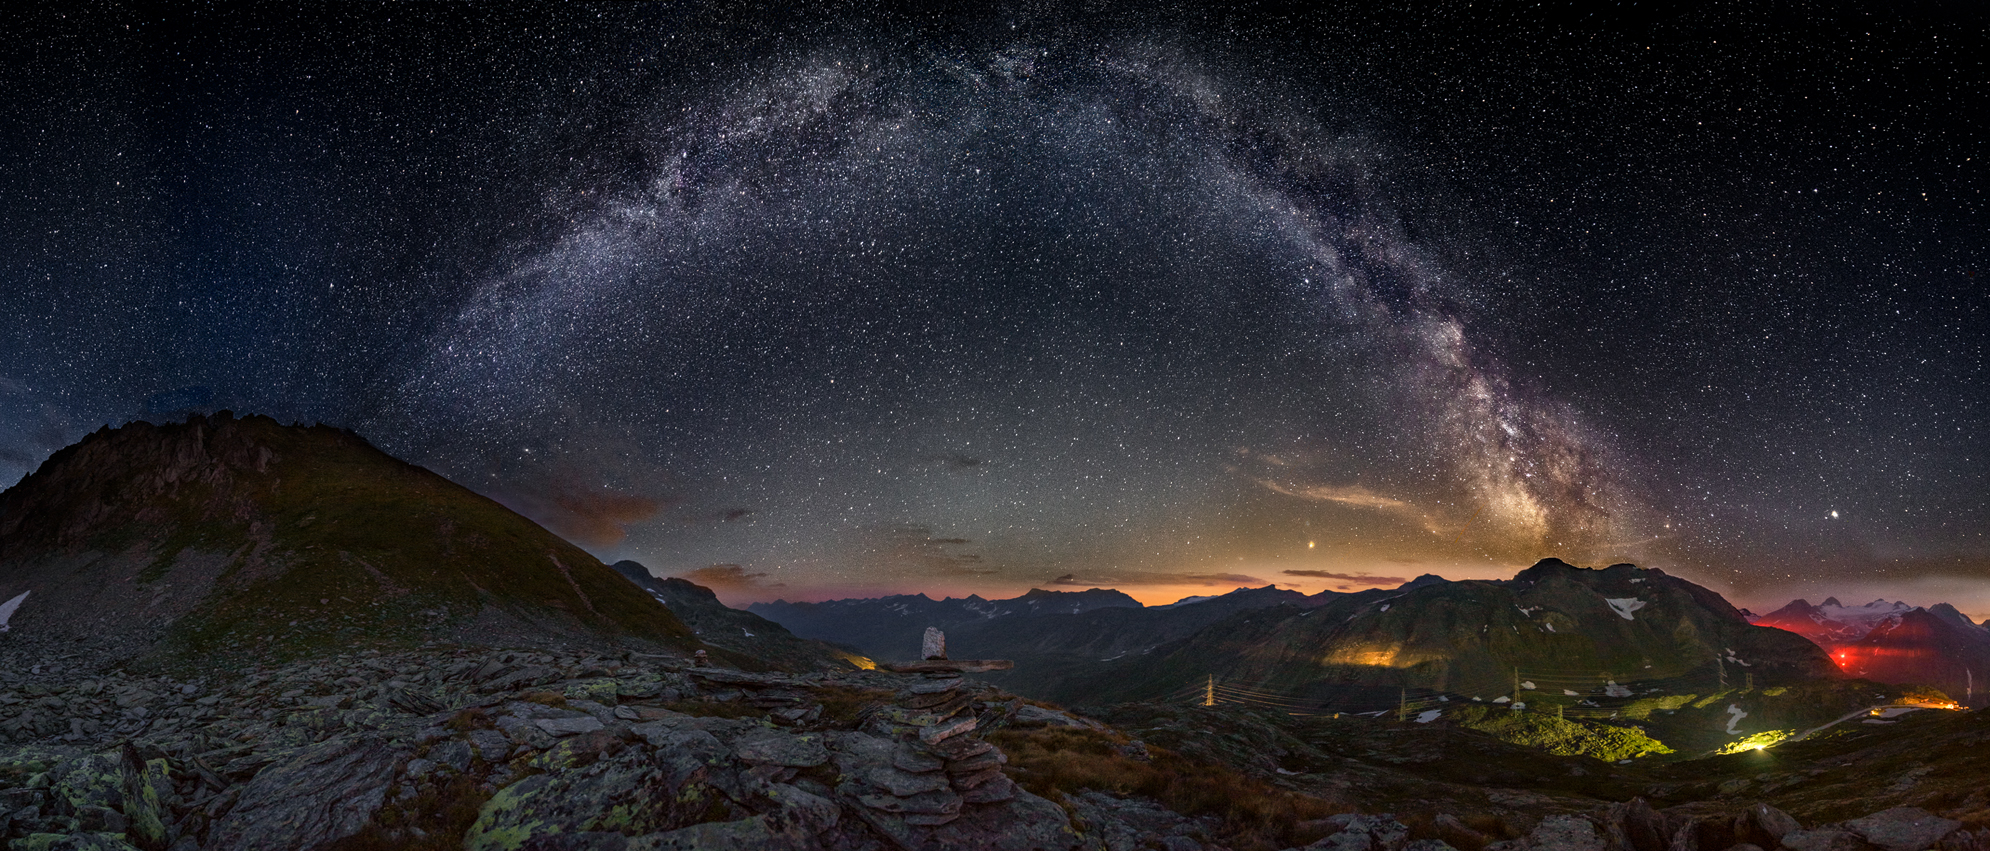 Milky Way on the Bedretto Valley...